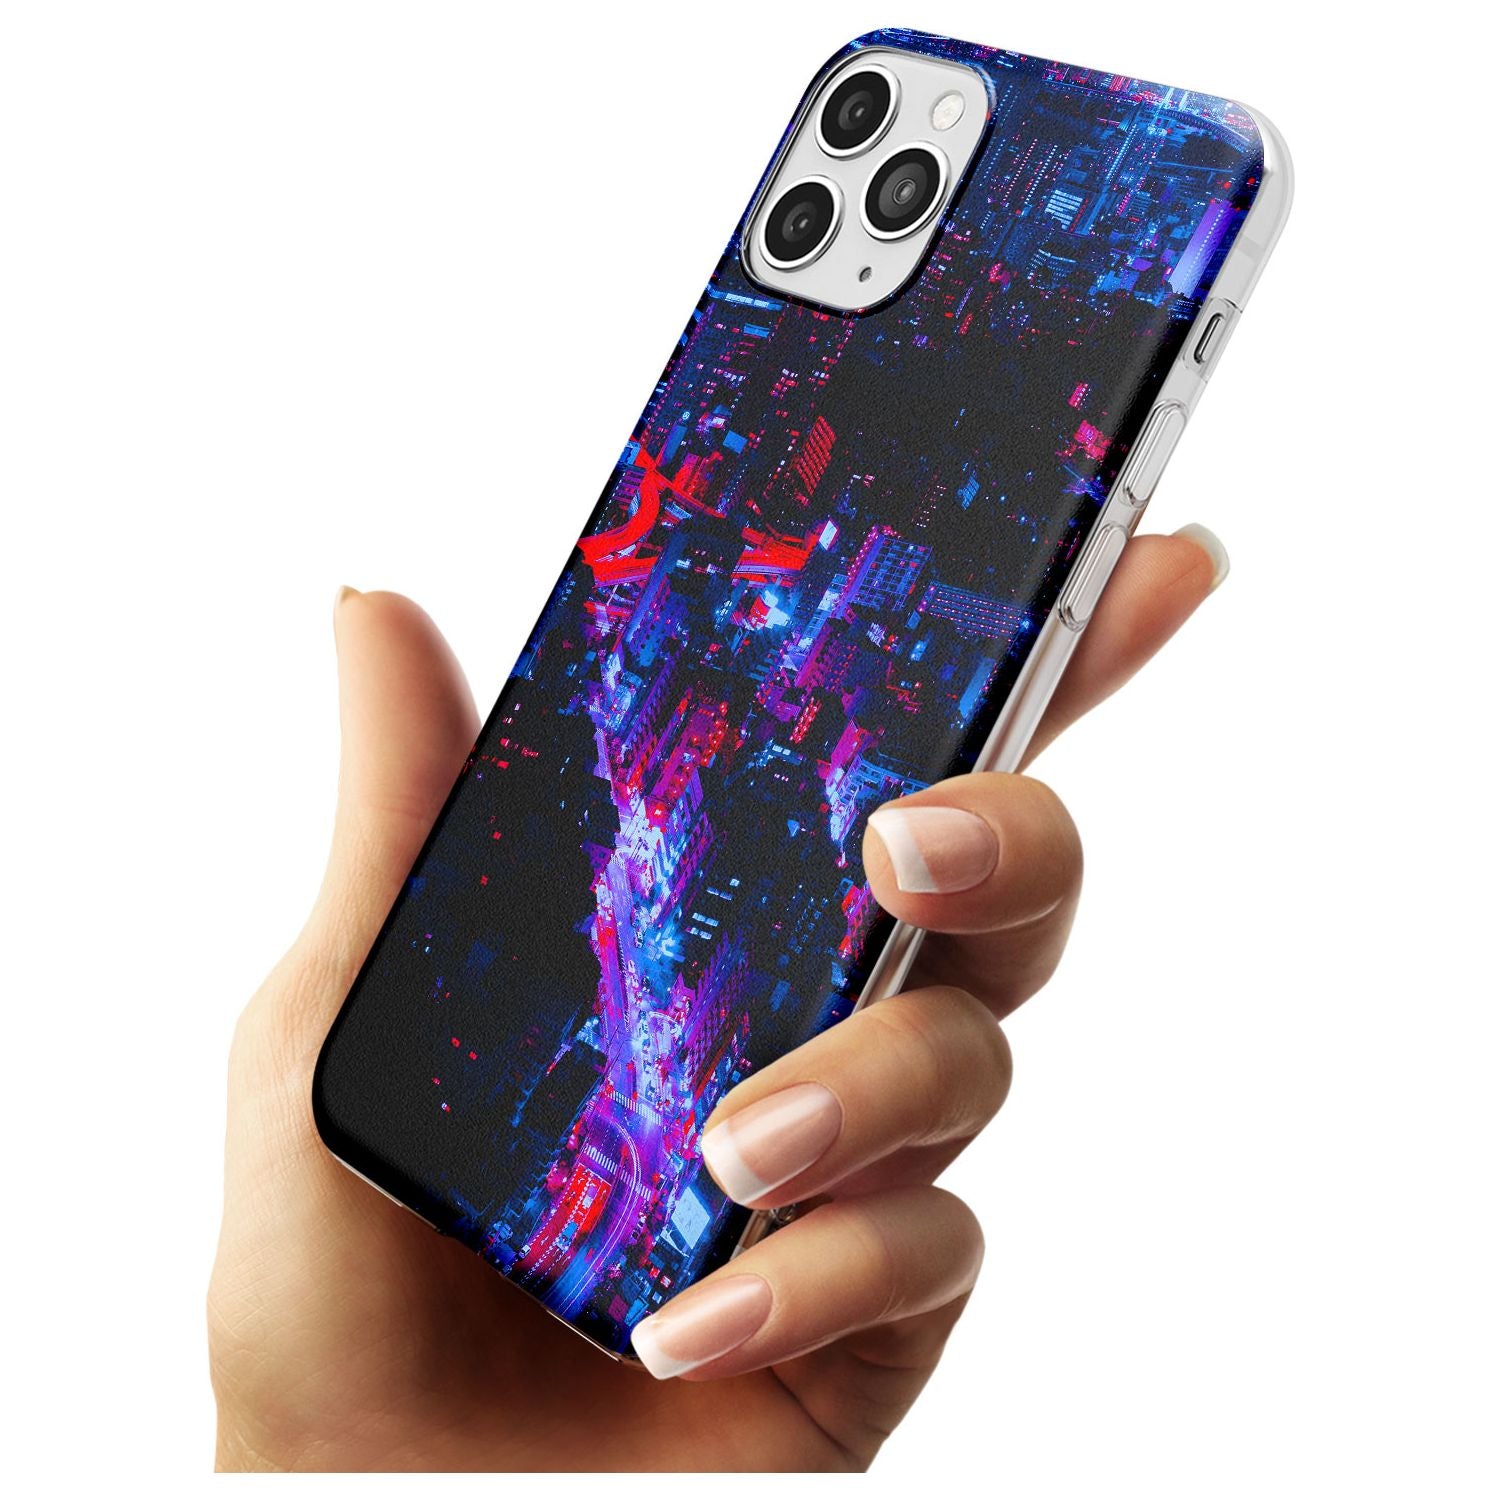 Arial City View - Neon Cities Photographs Slim TPU Phone Case for iPhone 11 Pro Max